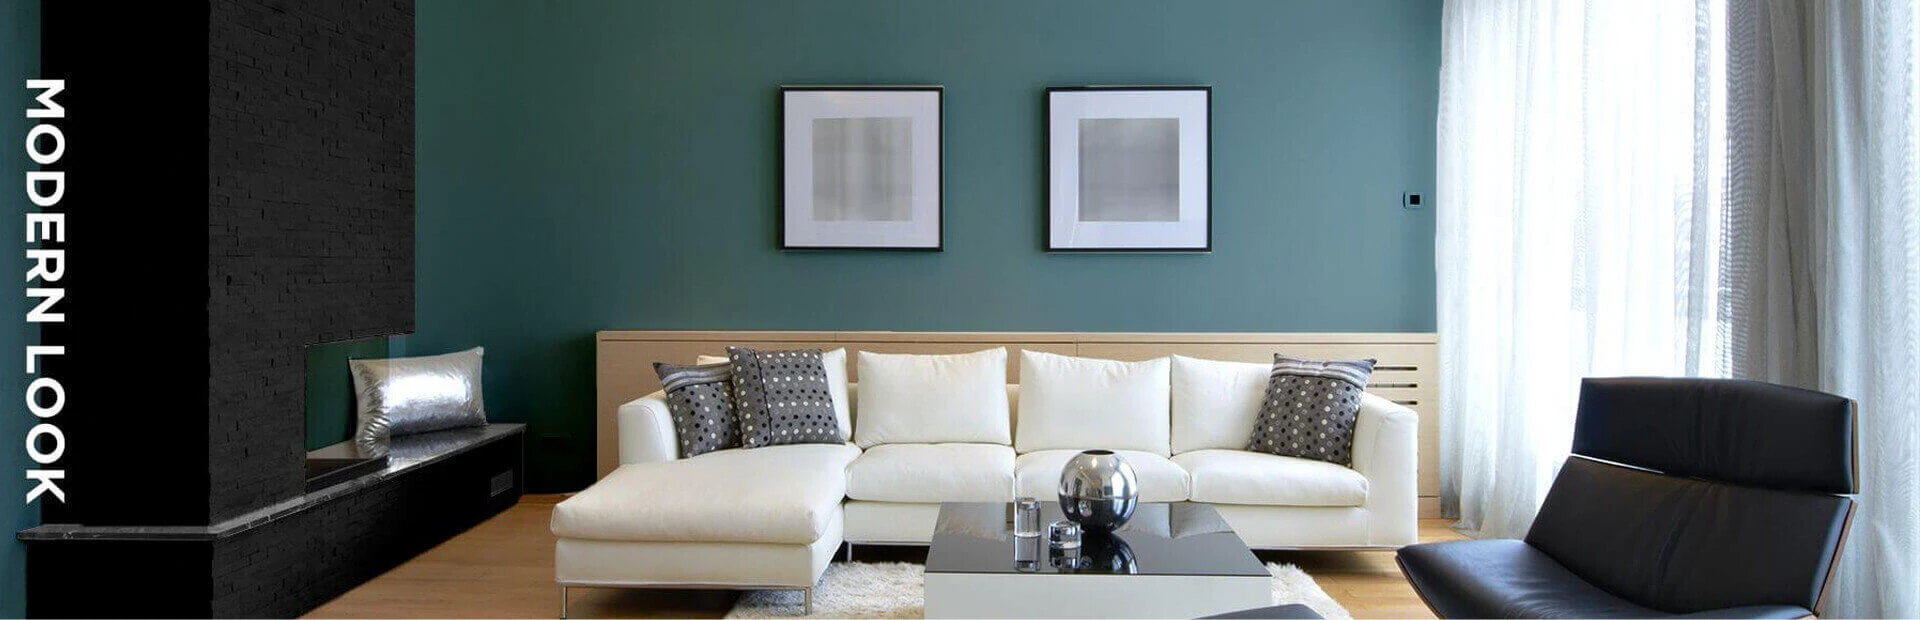 Green, cream and black living room colors.